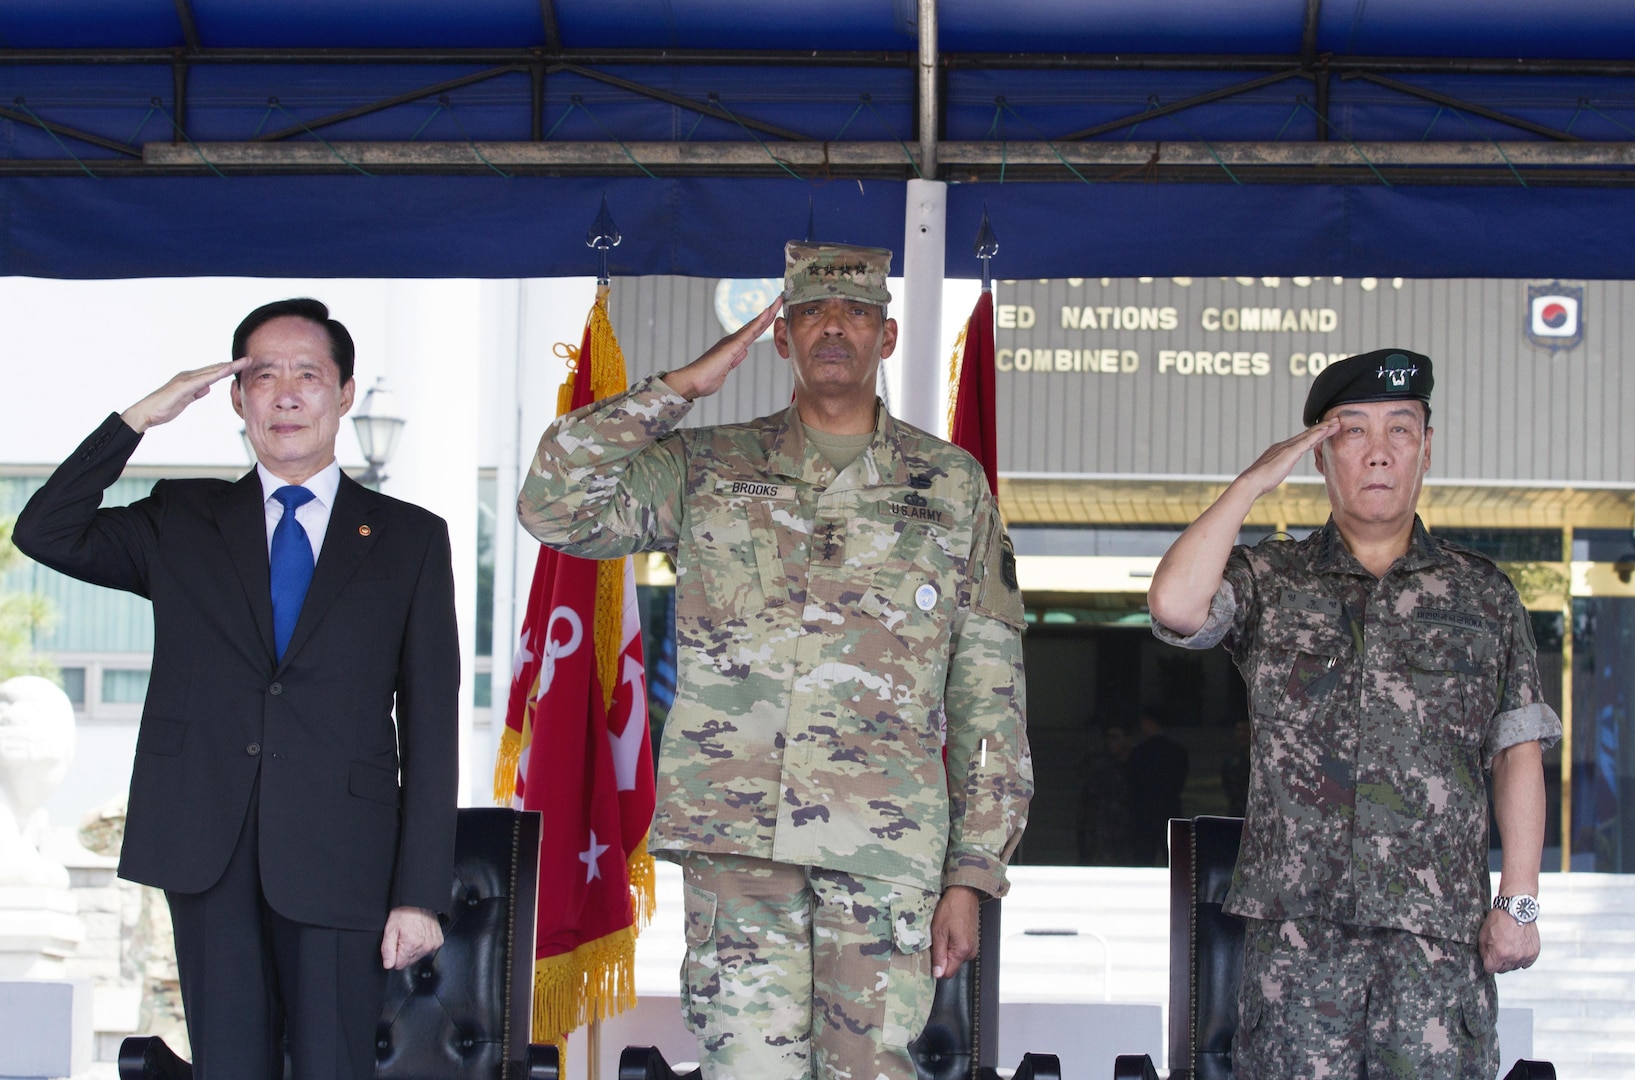 From left, Republic of Korea Minister of National Defense Song, Young-moo, General Vincent K. Brooks, commander of United Nations Command, Combined Forces Command and United States Forces Korea, and Gen. Leem Ho-young, deputy commander of CFC, render the appropriate honors during a ceremony at U.S. Army Garrison Yongsan, Republic of Korea, Aug. 4. The visit was the Honorable Song’s first time to USFK headquarters since taking over as the MINDEF July 14. The ceremony included an inspection of the troops, a 19-gun salute and a presentation of one of the shell casings to honor the MINDEF.